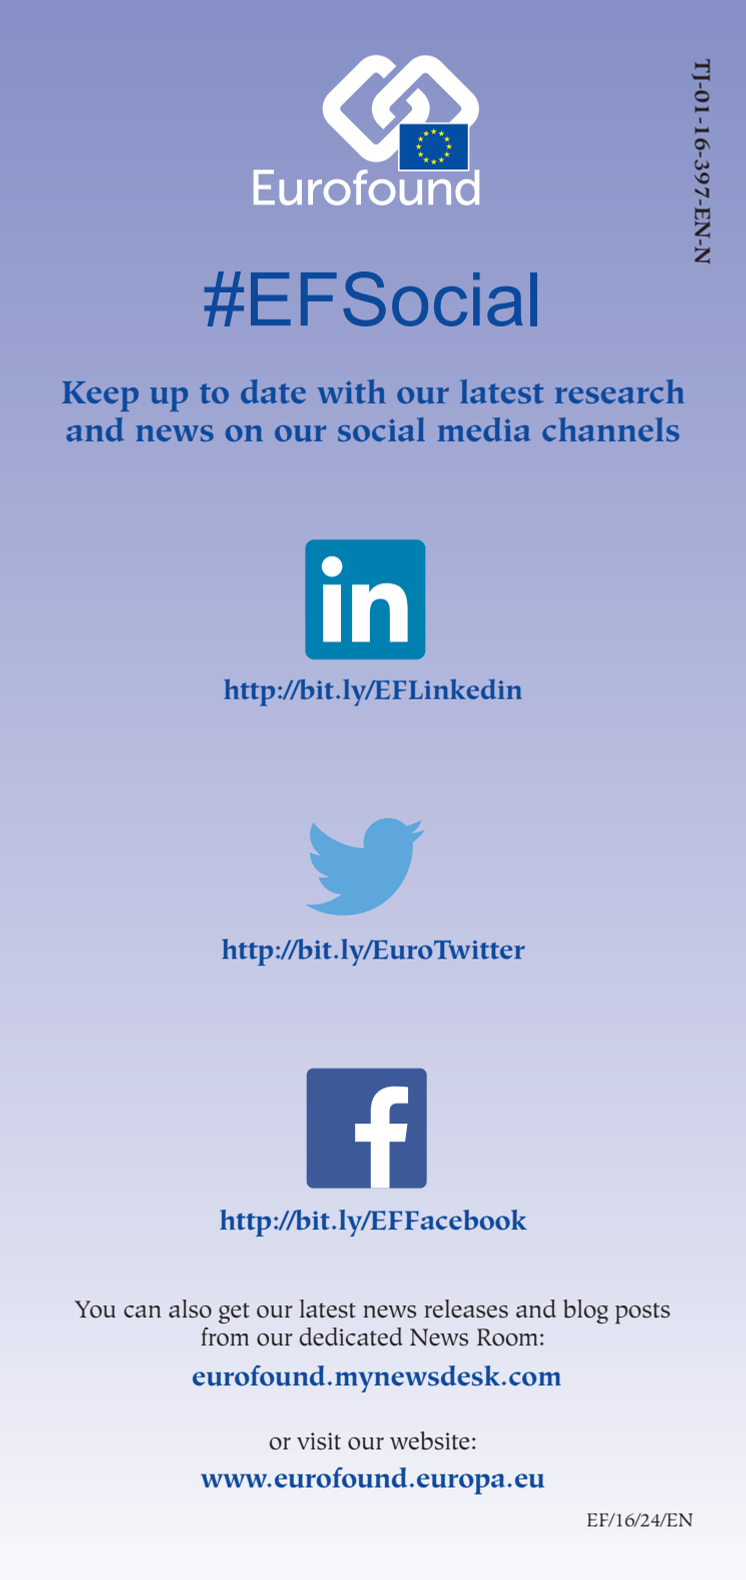 Keep up to date with our latest research and news on our social media channels